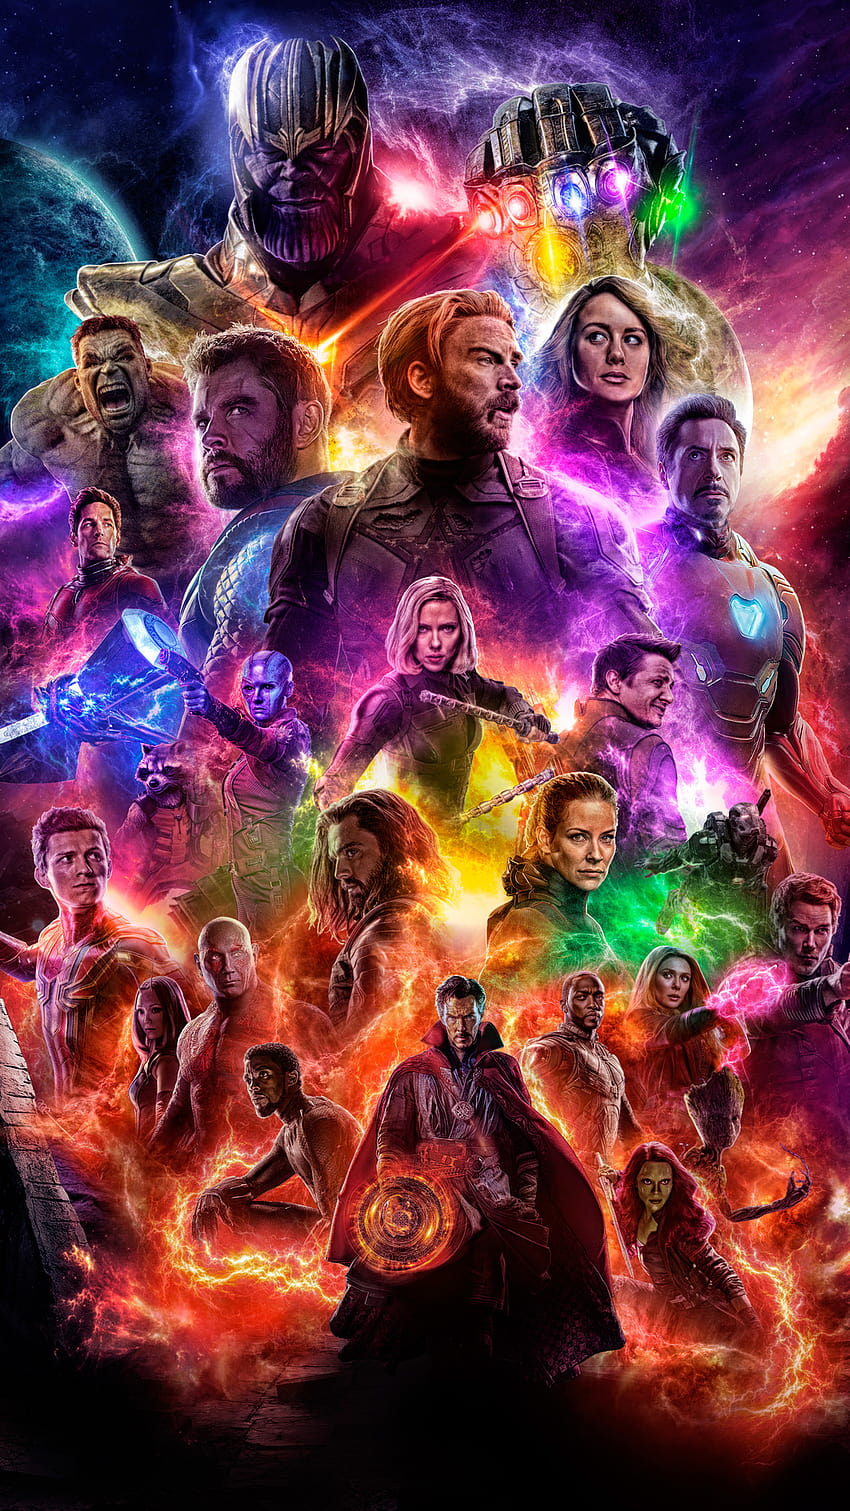 1080x1920 Avengers 4 End Game 2019 Iphone 7,6s,6 Plus, Pixel xl ,One, avengers 5 HD phone wallpaper